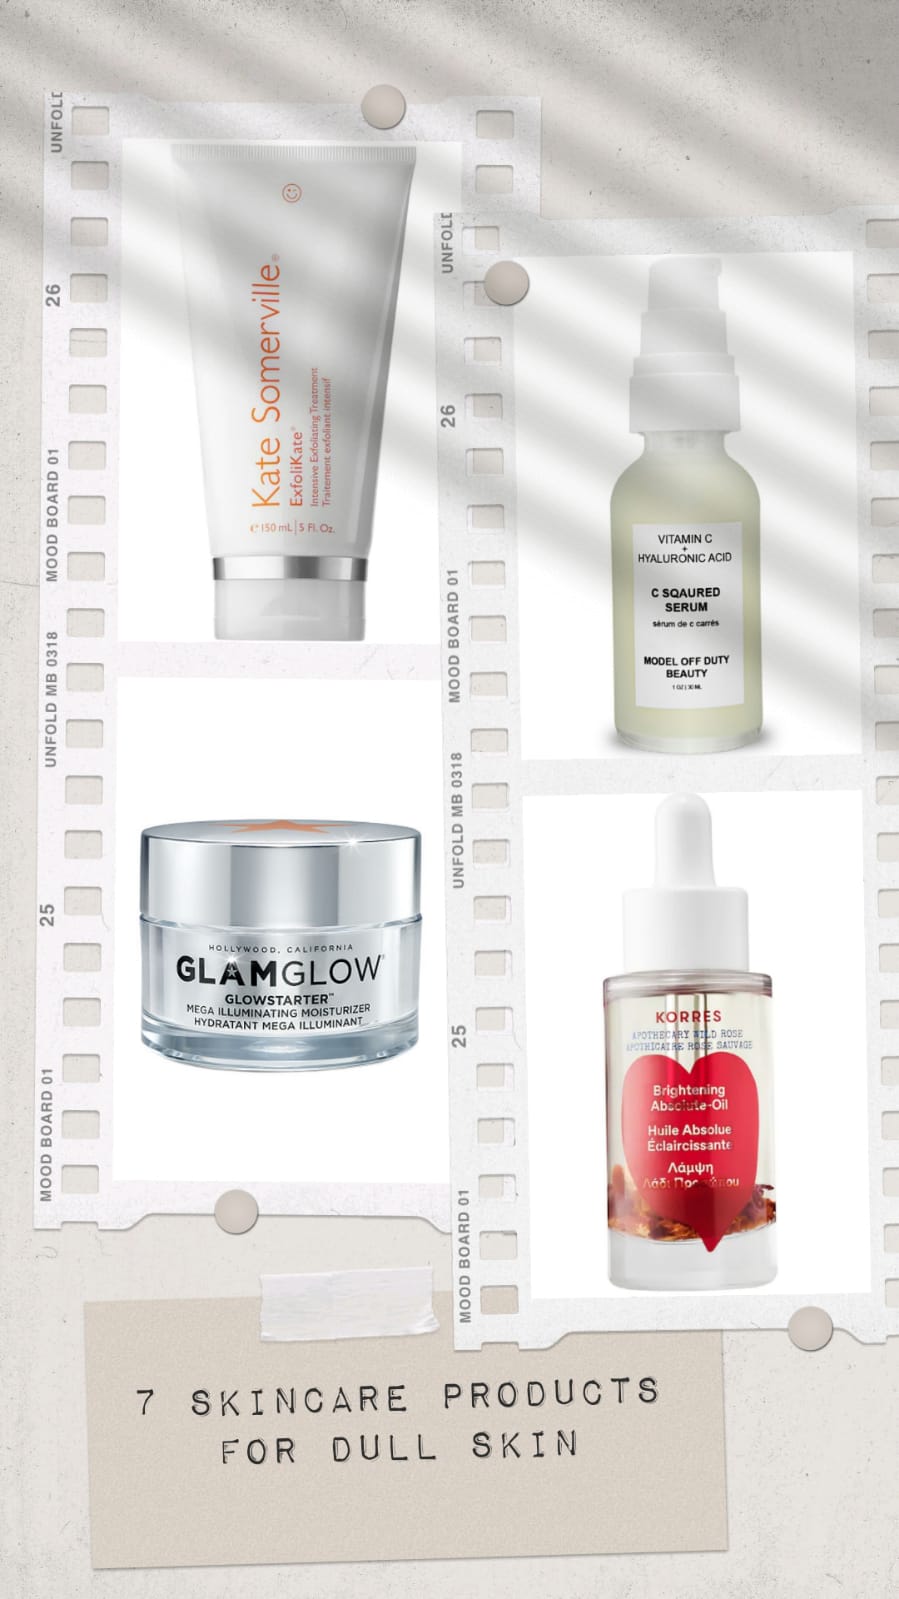 skincare products for dull skin